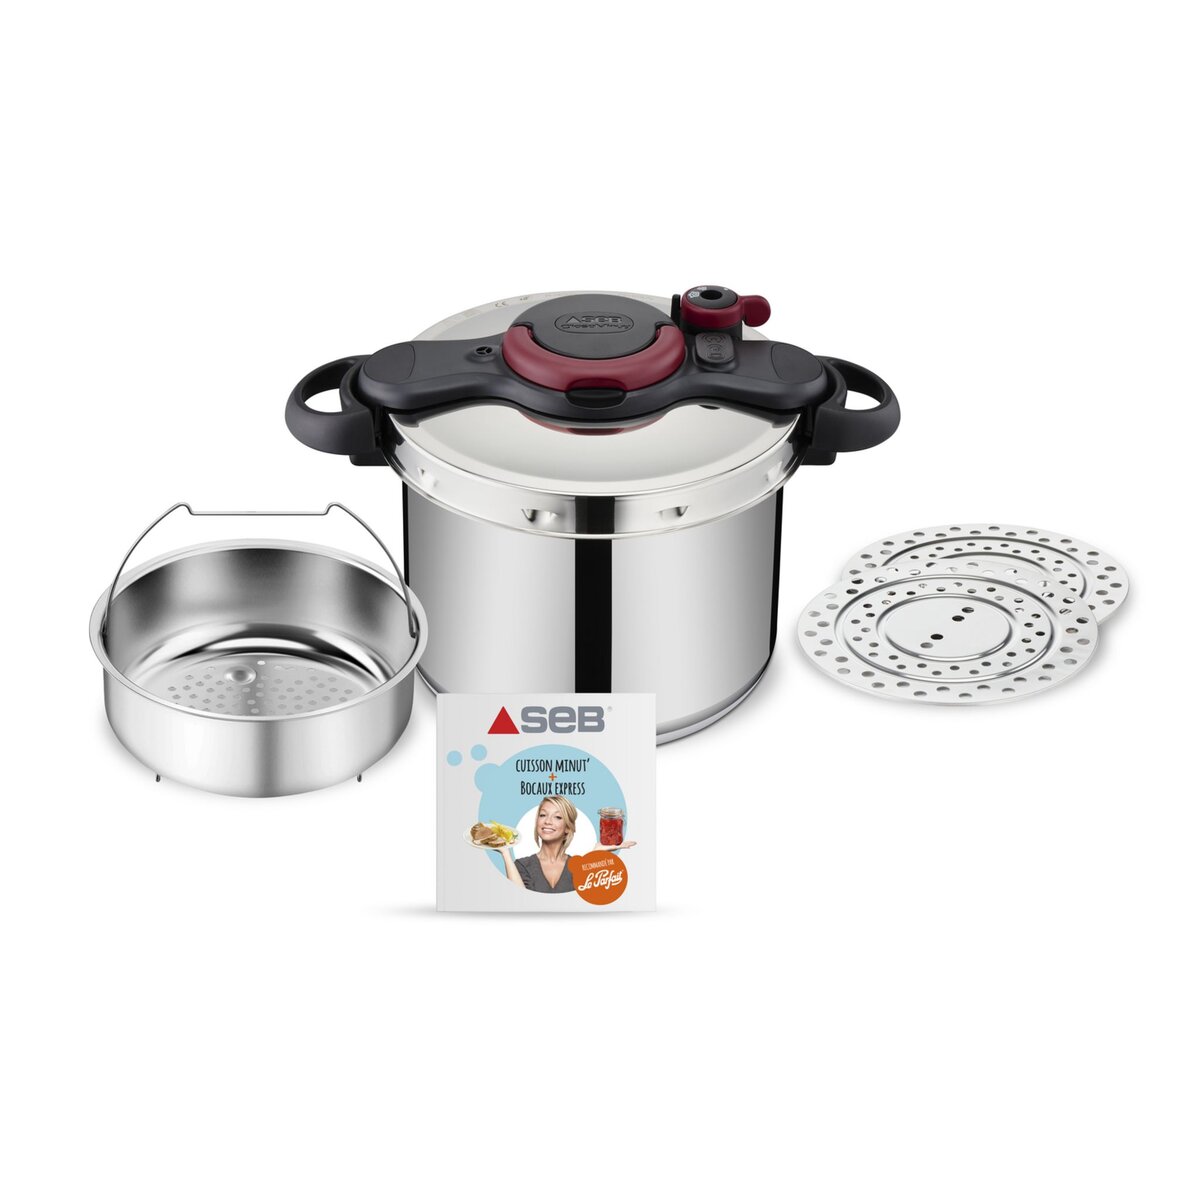 ClipsoMinut'® CHEF 6L Cocotte-minute®